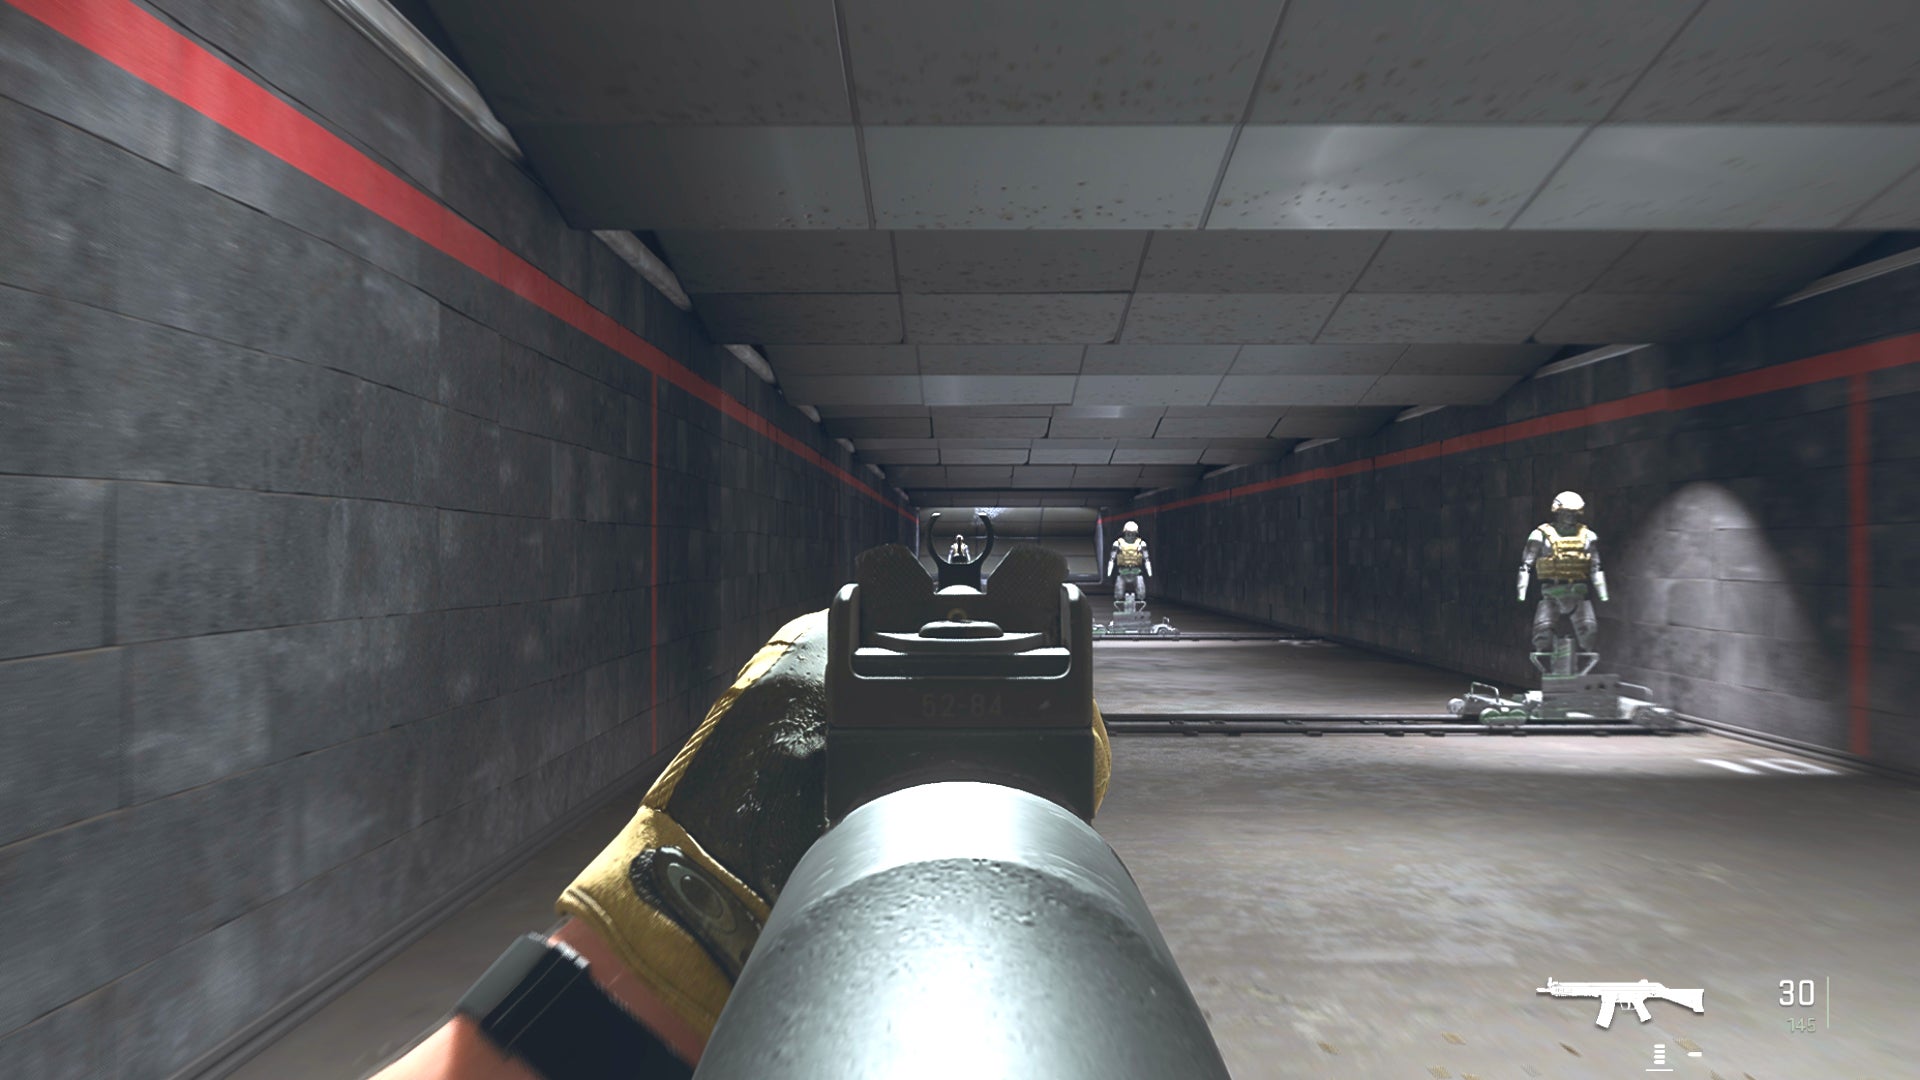 The player in Warzone 2.0 aims at a training dummy with the Lachmann-556 ironsights.